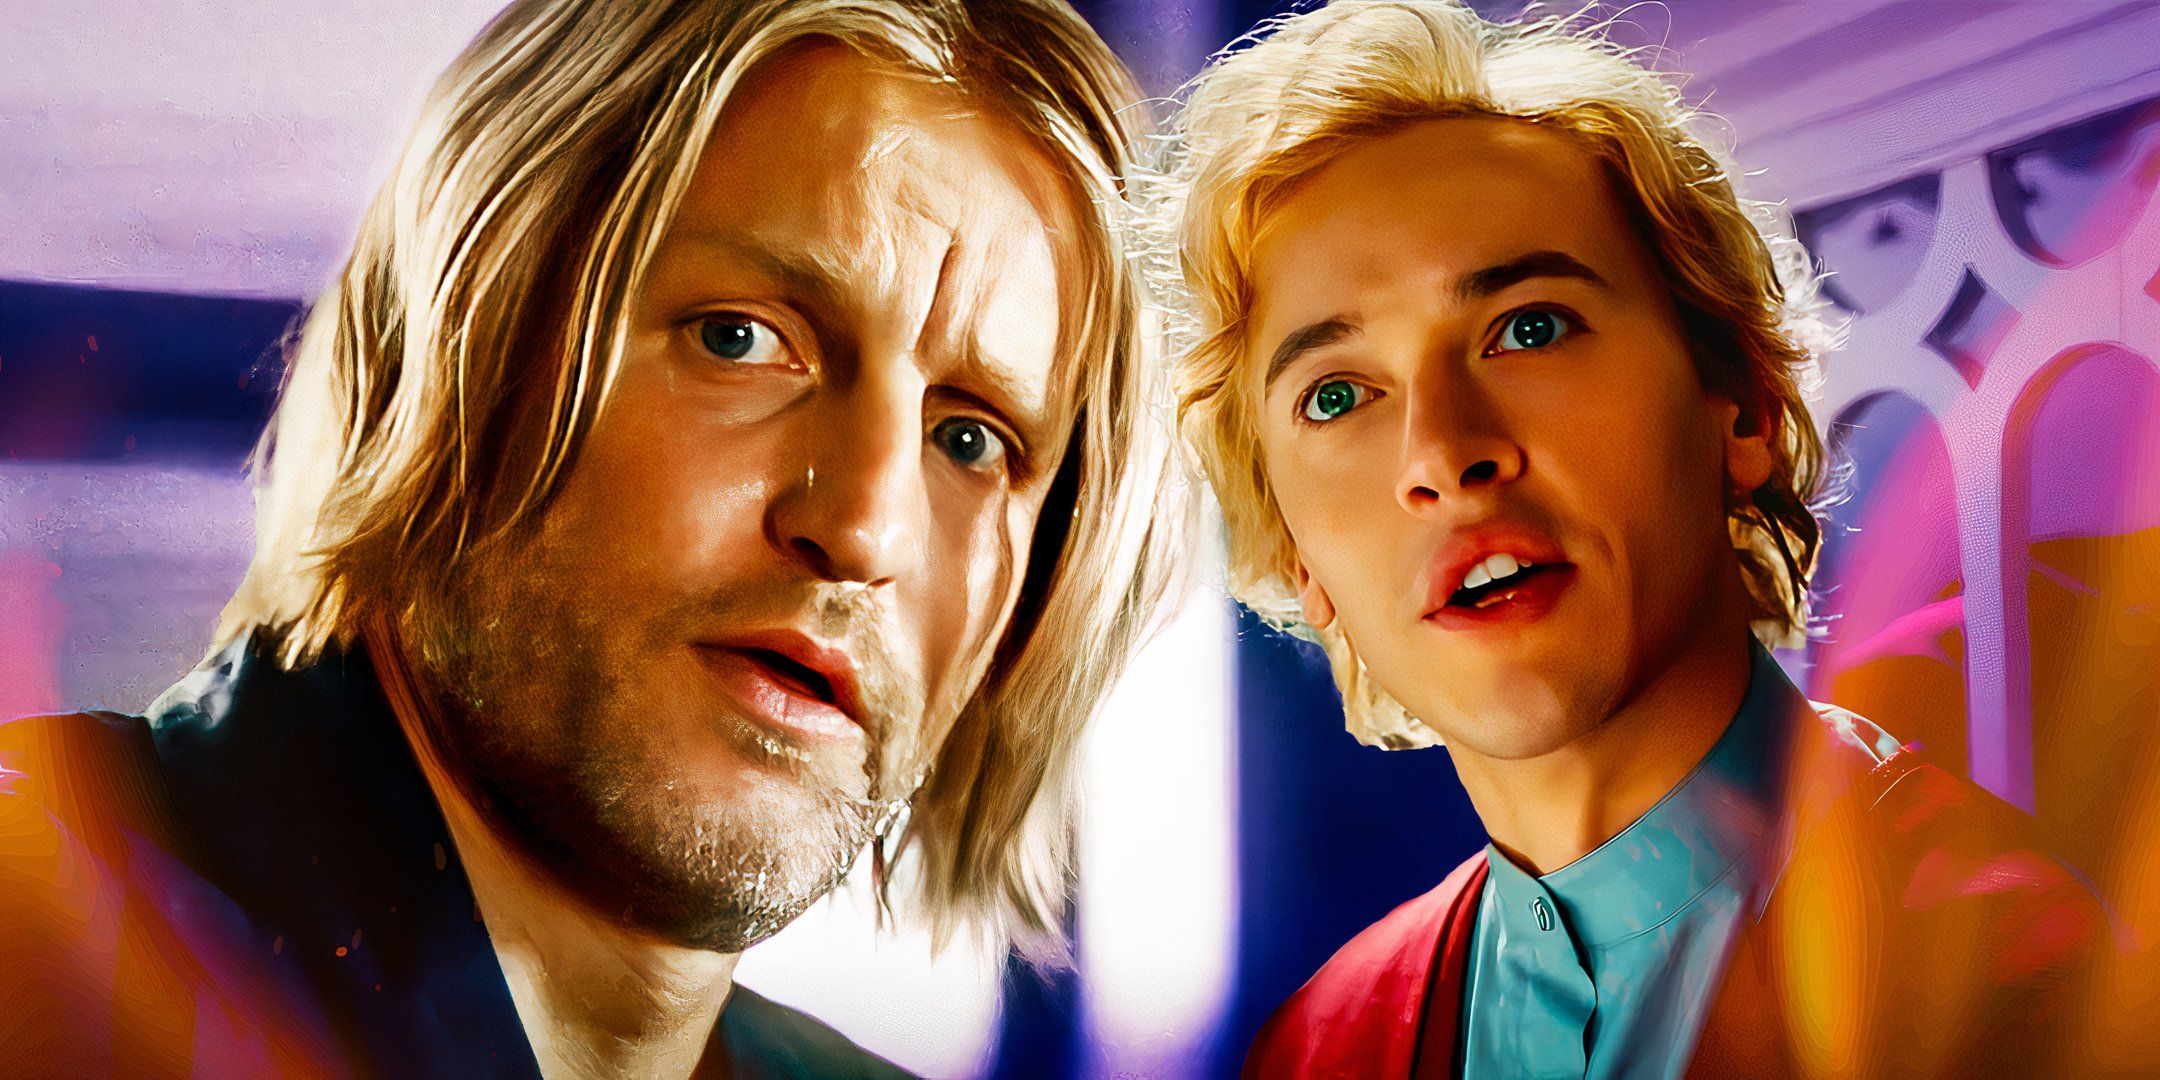 Haymitch-and-Coriolanus-Snow-from-The-Hunger-Games-Franchise